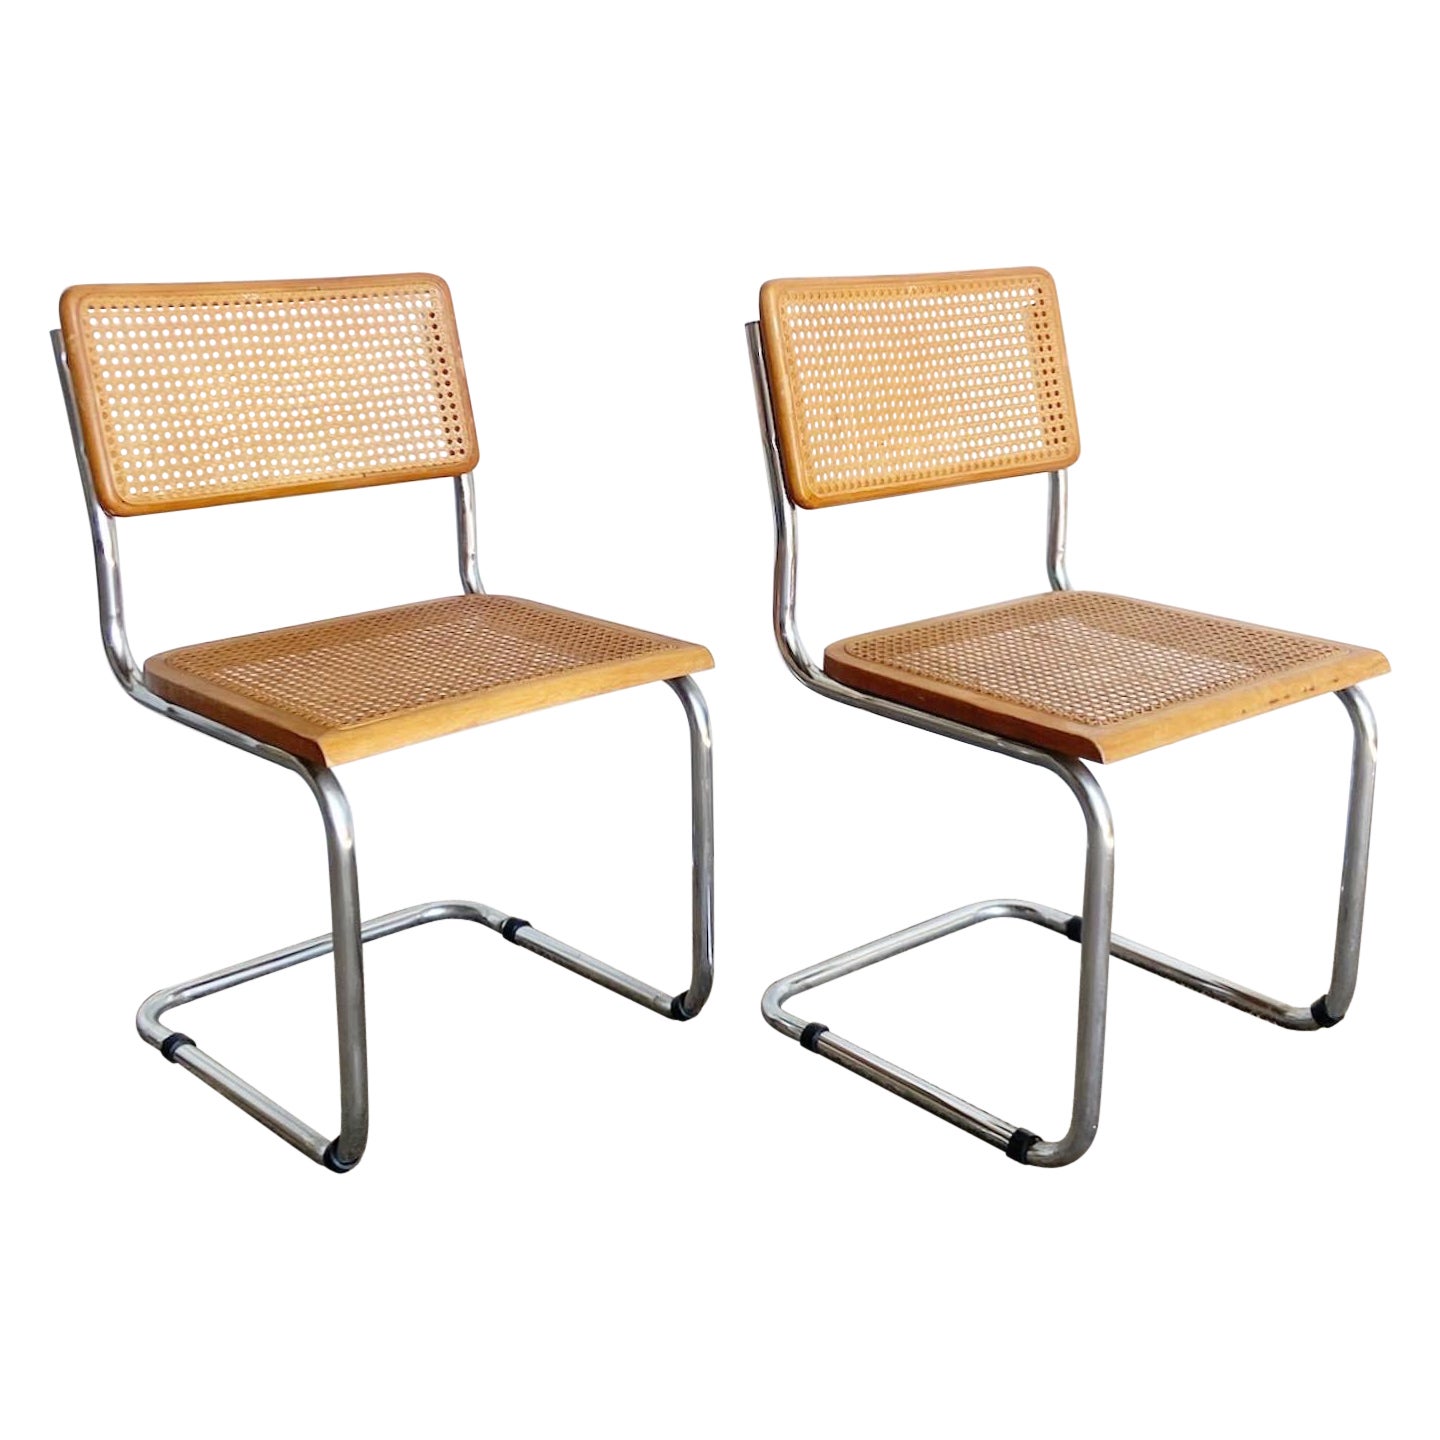 Mid Century Modern Cane and Chrome Cantilever Dining Chairs - a Pair For Sale